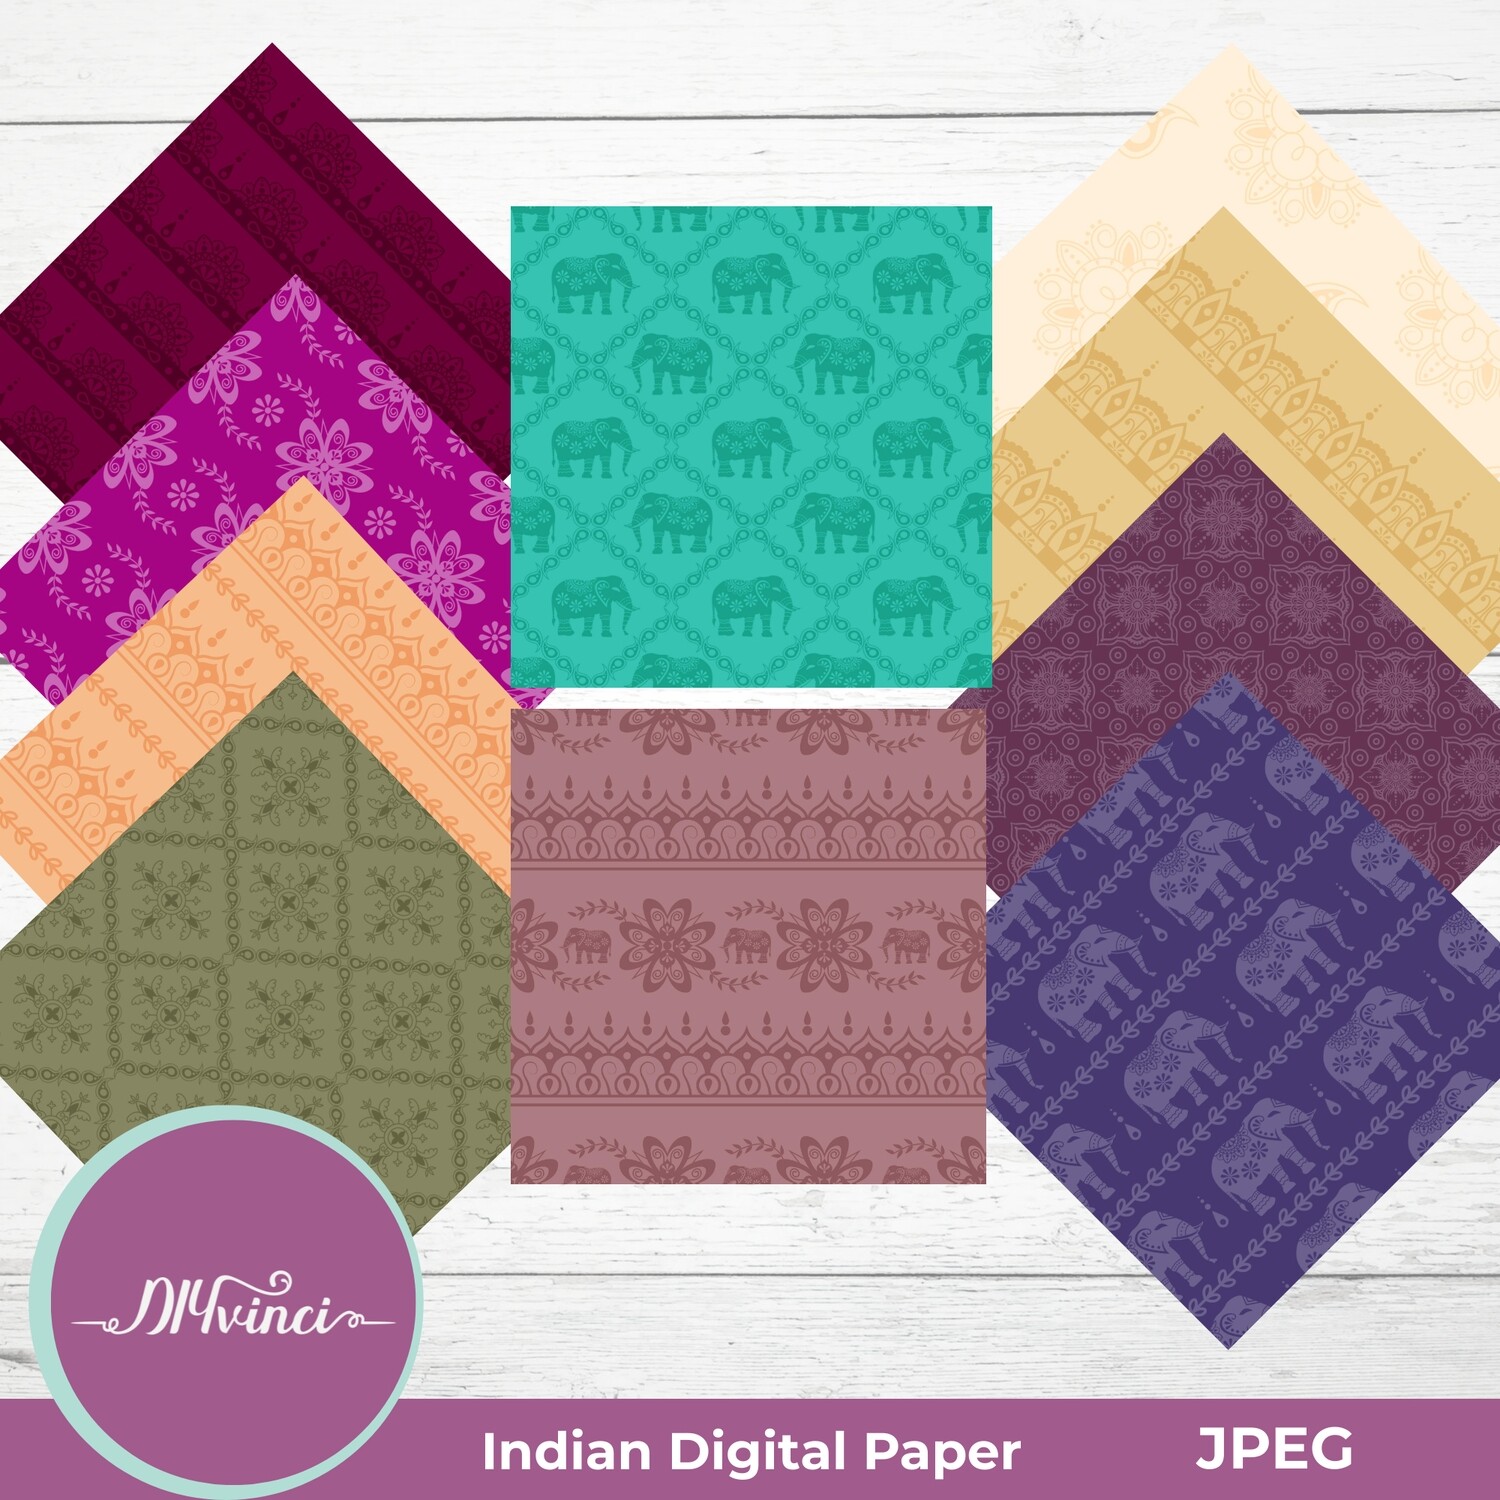 Seamless Indian Style Digital Paper Pack - 10 JPEG - Personal & Commercial Use